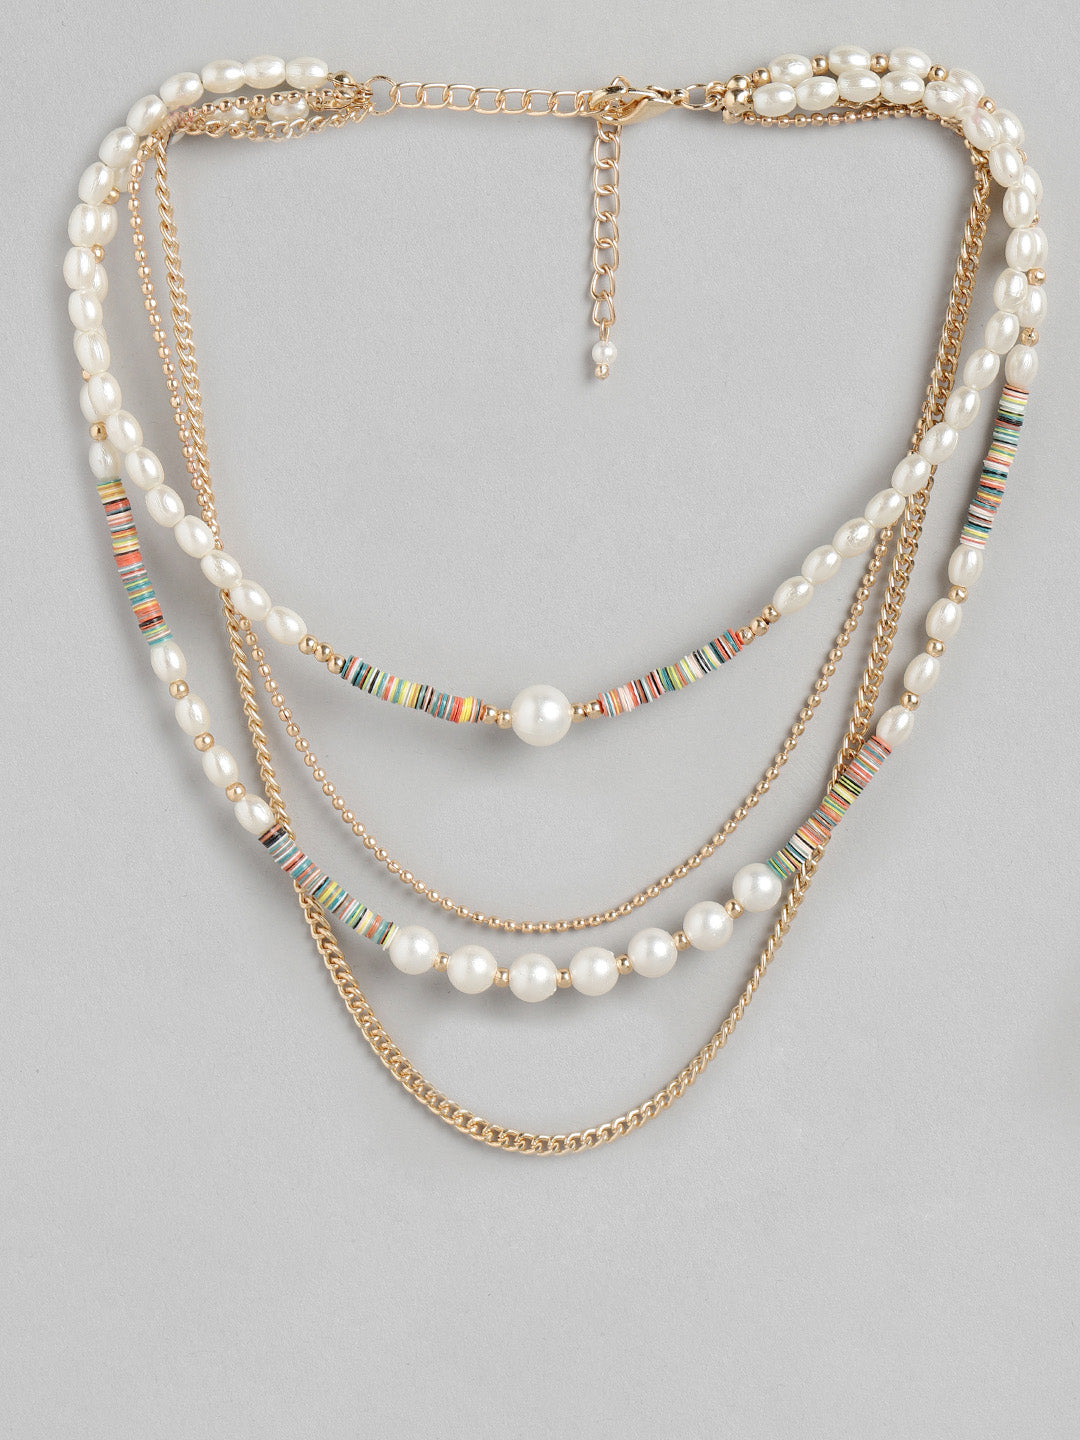 Blueberry Maya pearl necklace